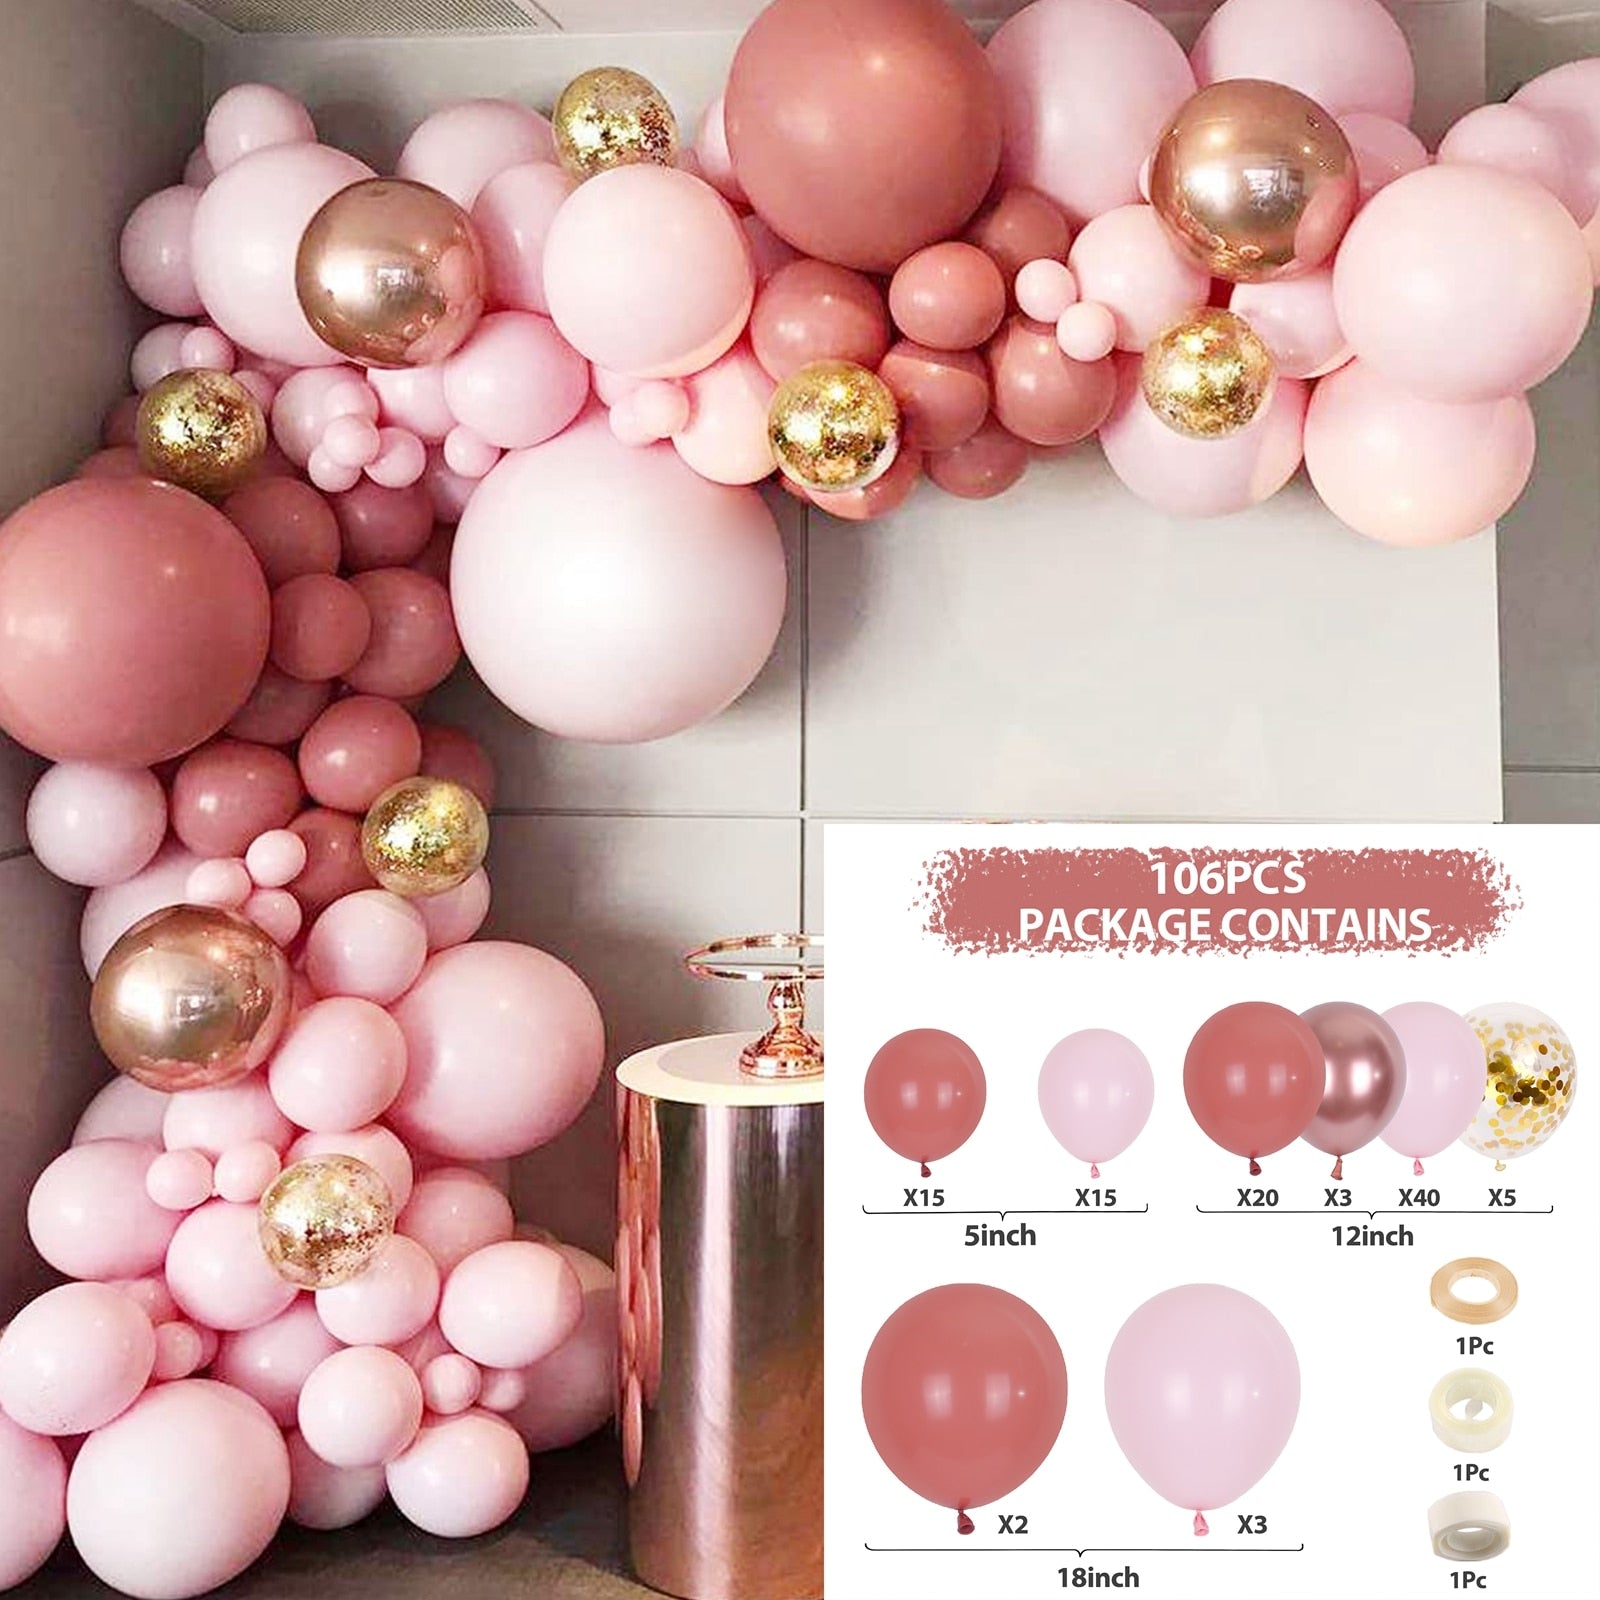 Pink Balloon Garland Arch Kit Birthday Party Decorations Kids Birthday Foil White Gold Balloon Wedding Decor Baby Shower Globos Balloons Set for Birthday Parties DailyAlertDeals 32 AS SHOWN 